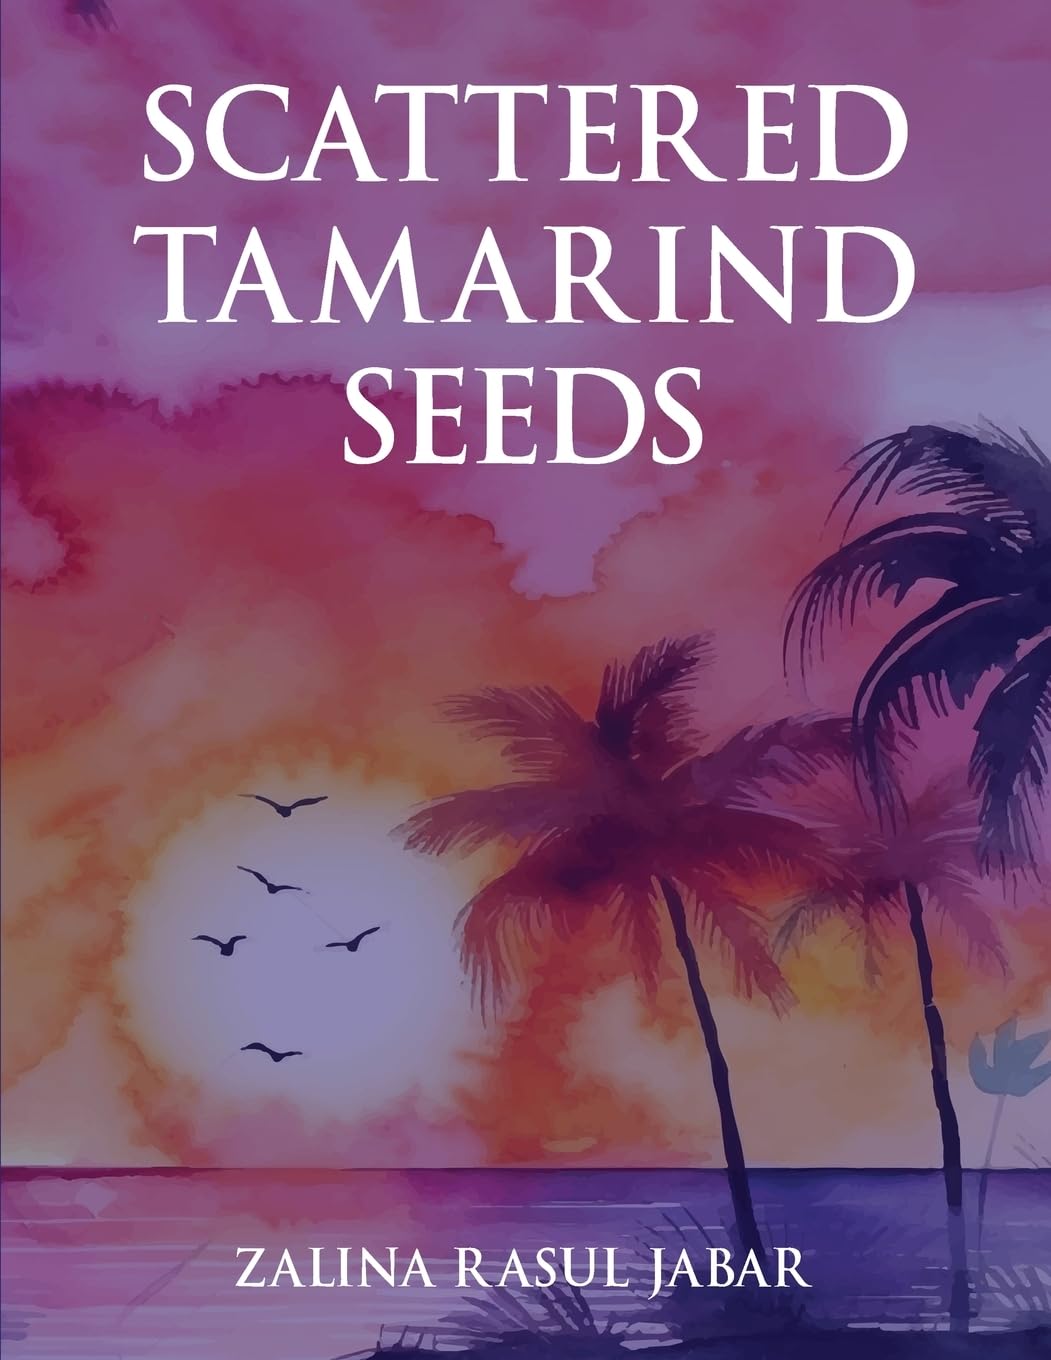 Embark on a Soul-Stirring Journey with Zalina Rasul Jabar's "Scattered Tamarind Seeds" - A Poetic Odyssey through Life's Enigma